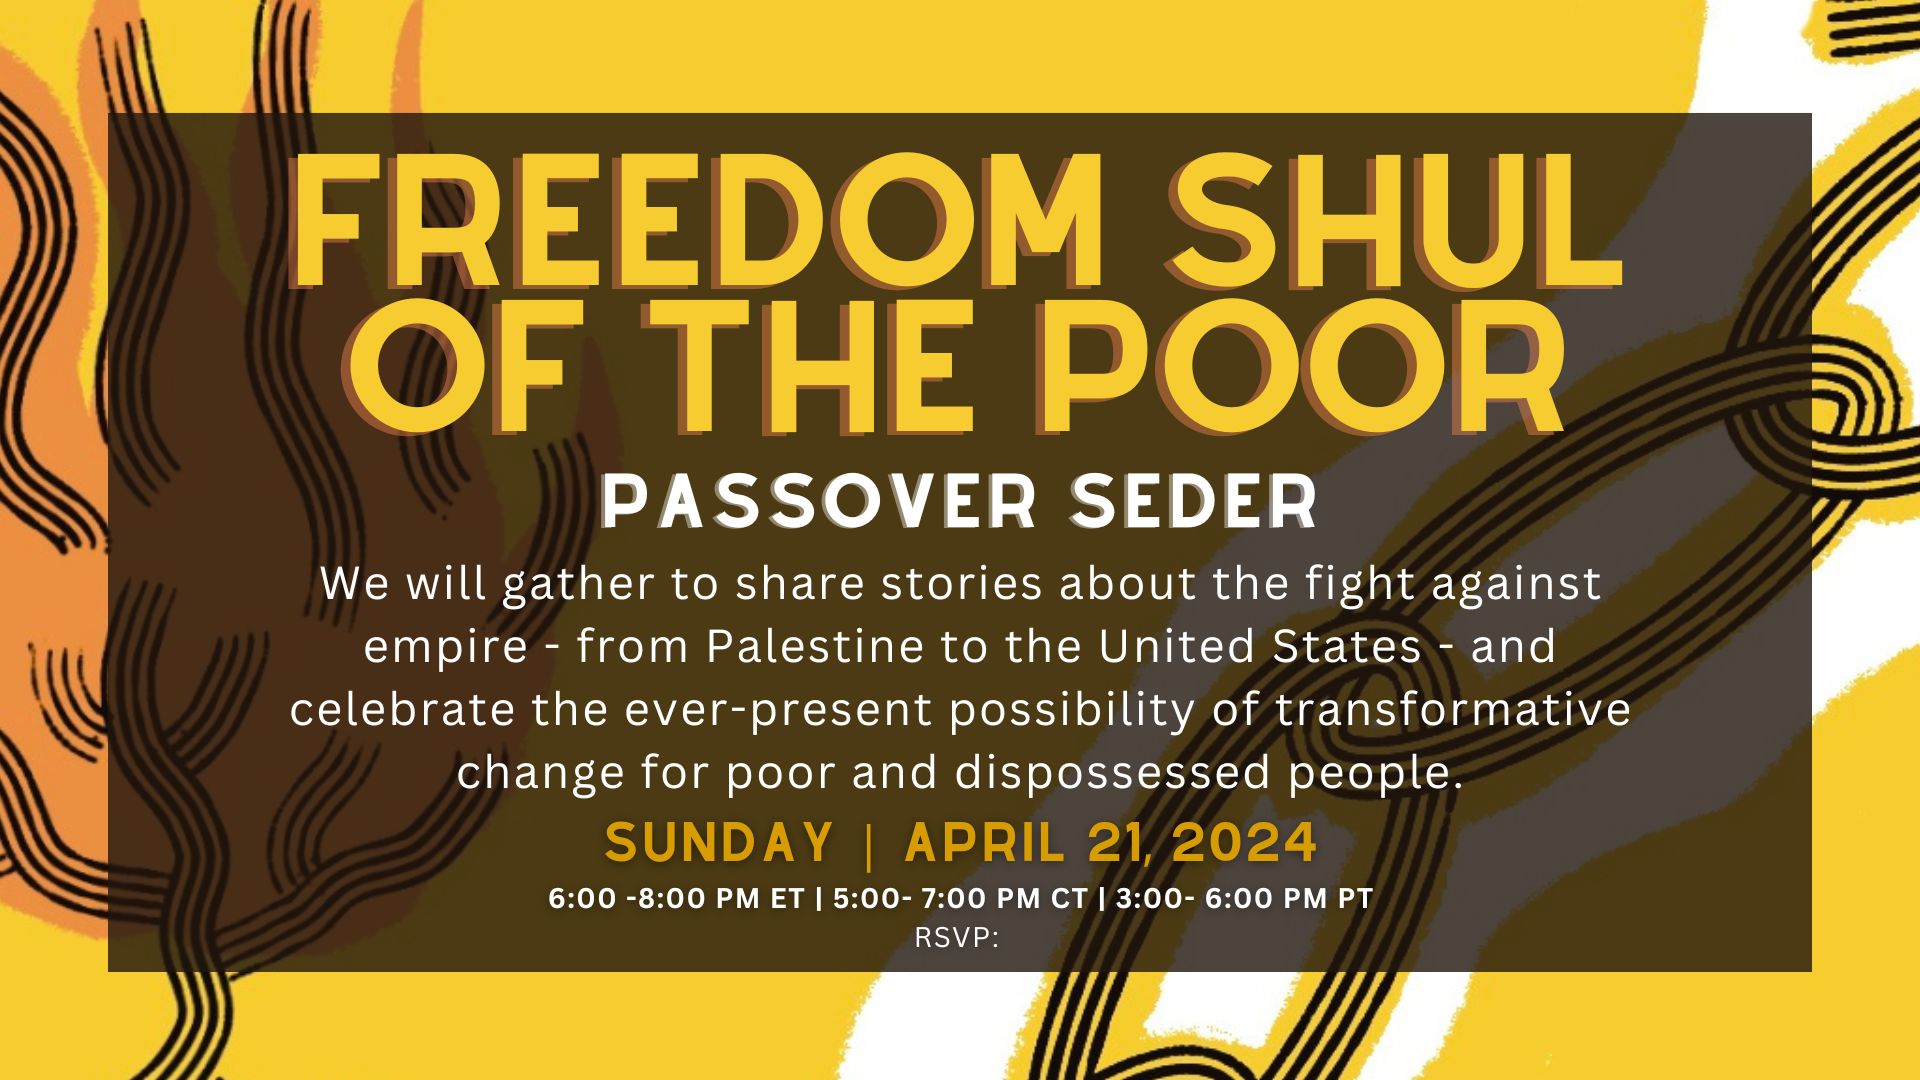 Freedom Shul of the Poor Passover Seder